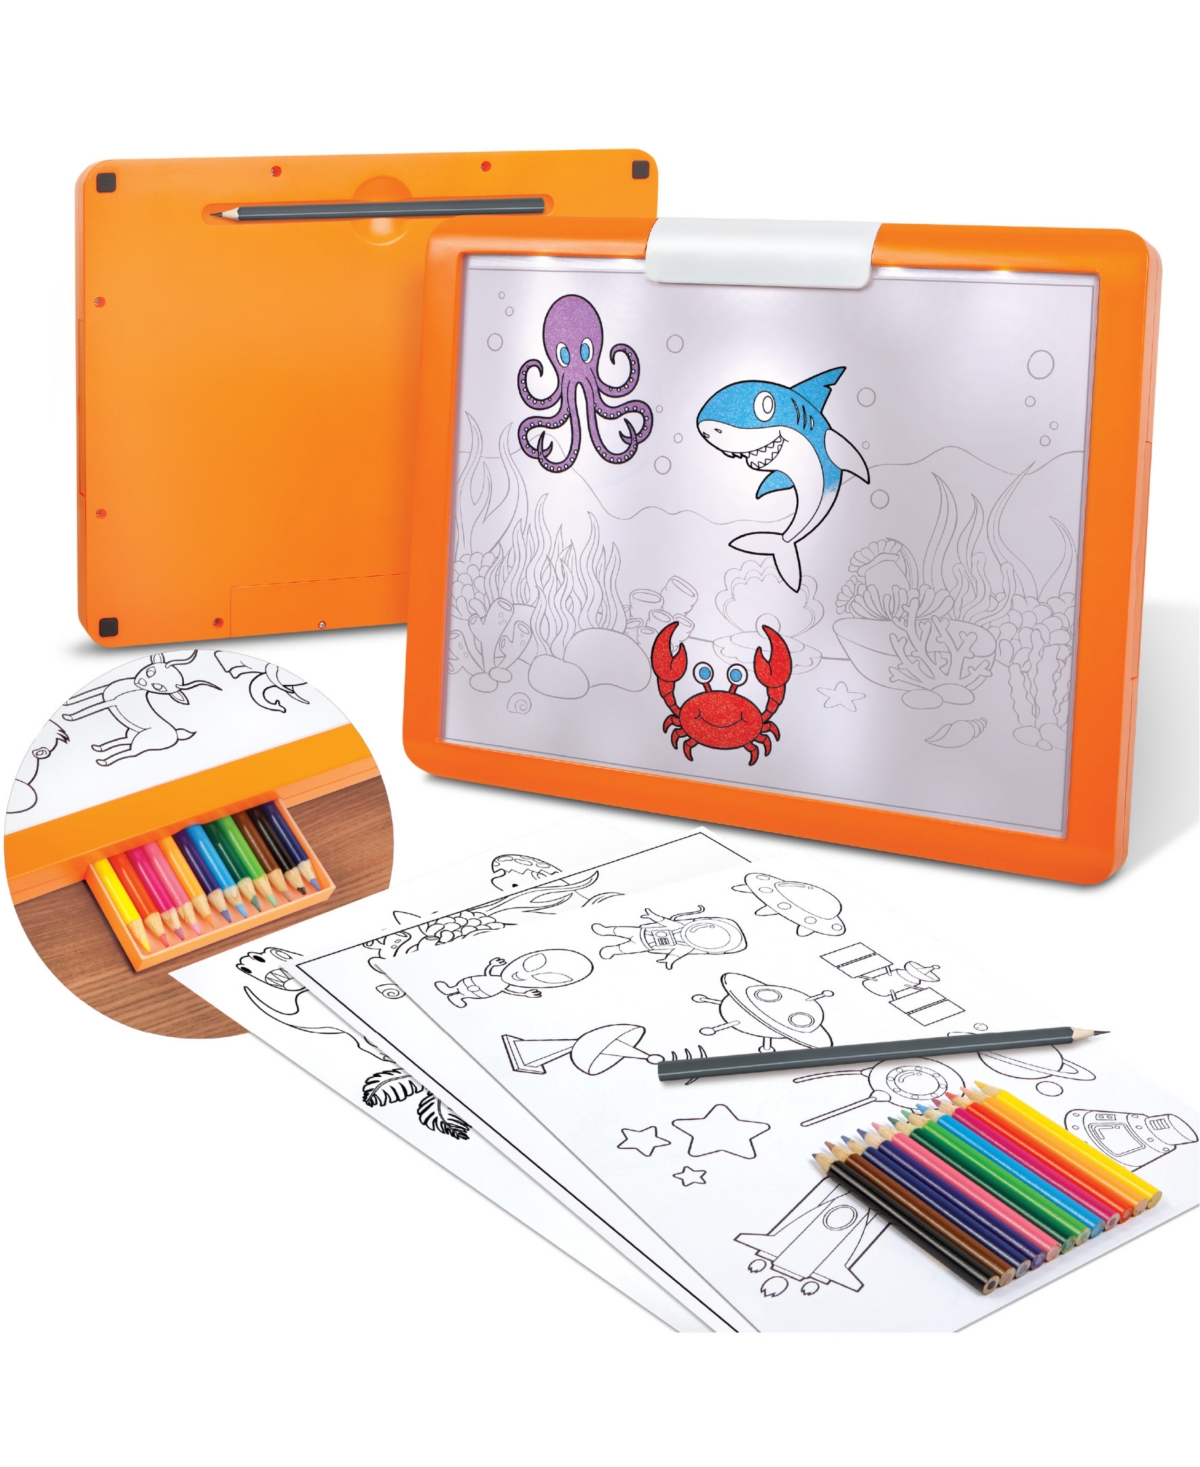 Discovery Kids'  Led Illuminated Tracing Tablet In Bright Orange